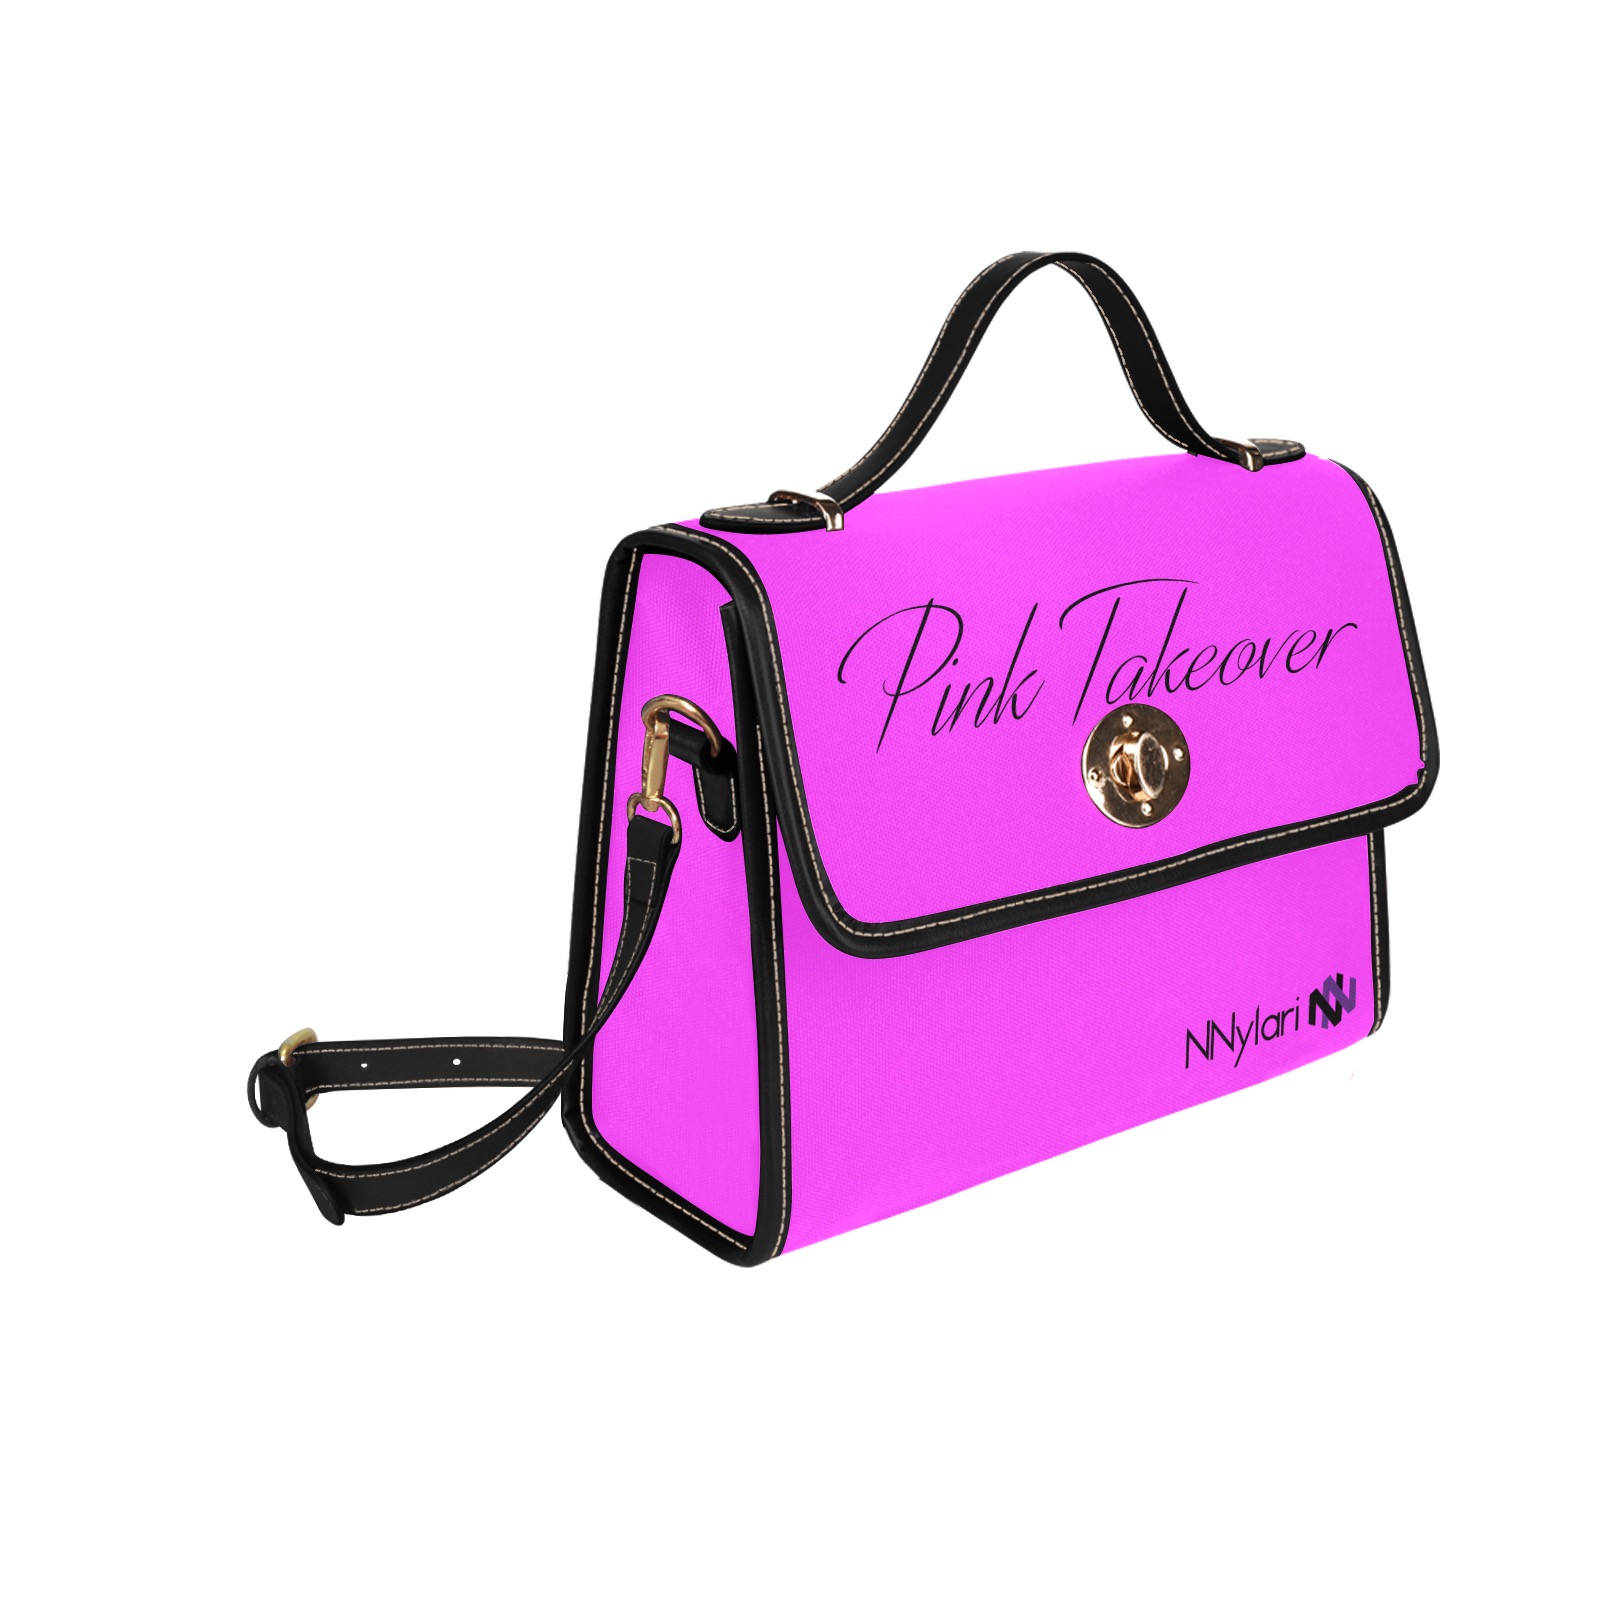 PinkTakeover Purse Waterproof Canvas Bag-Black (All Over Print) (Model 1641)